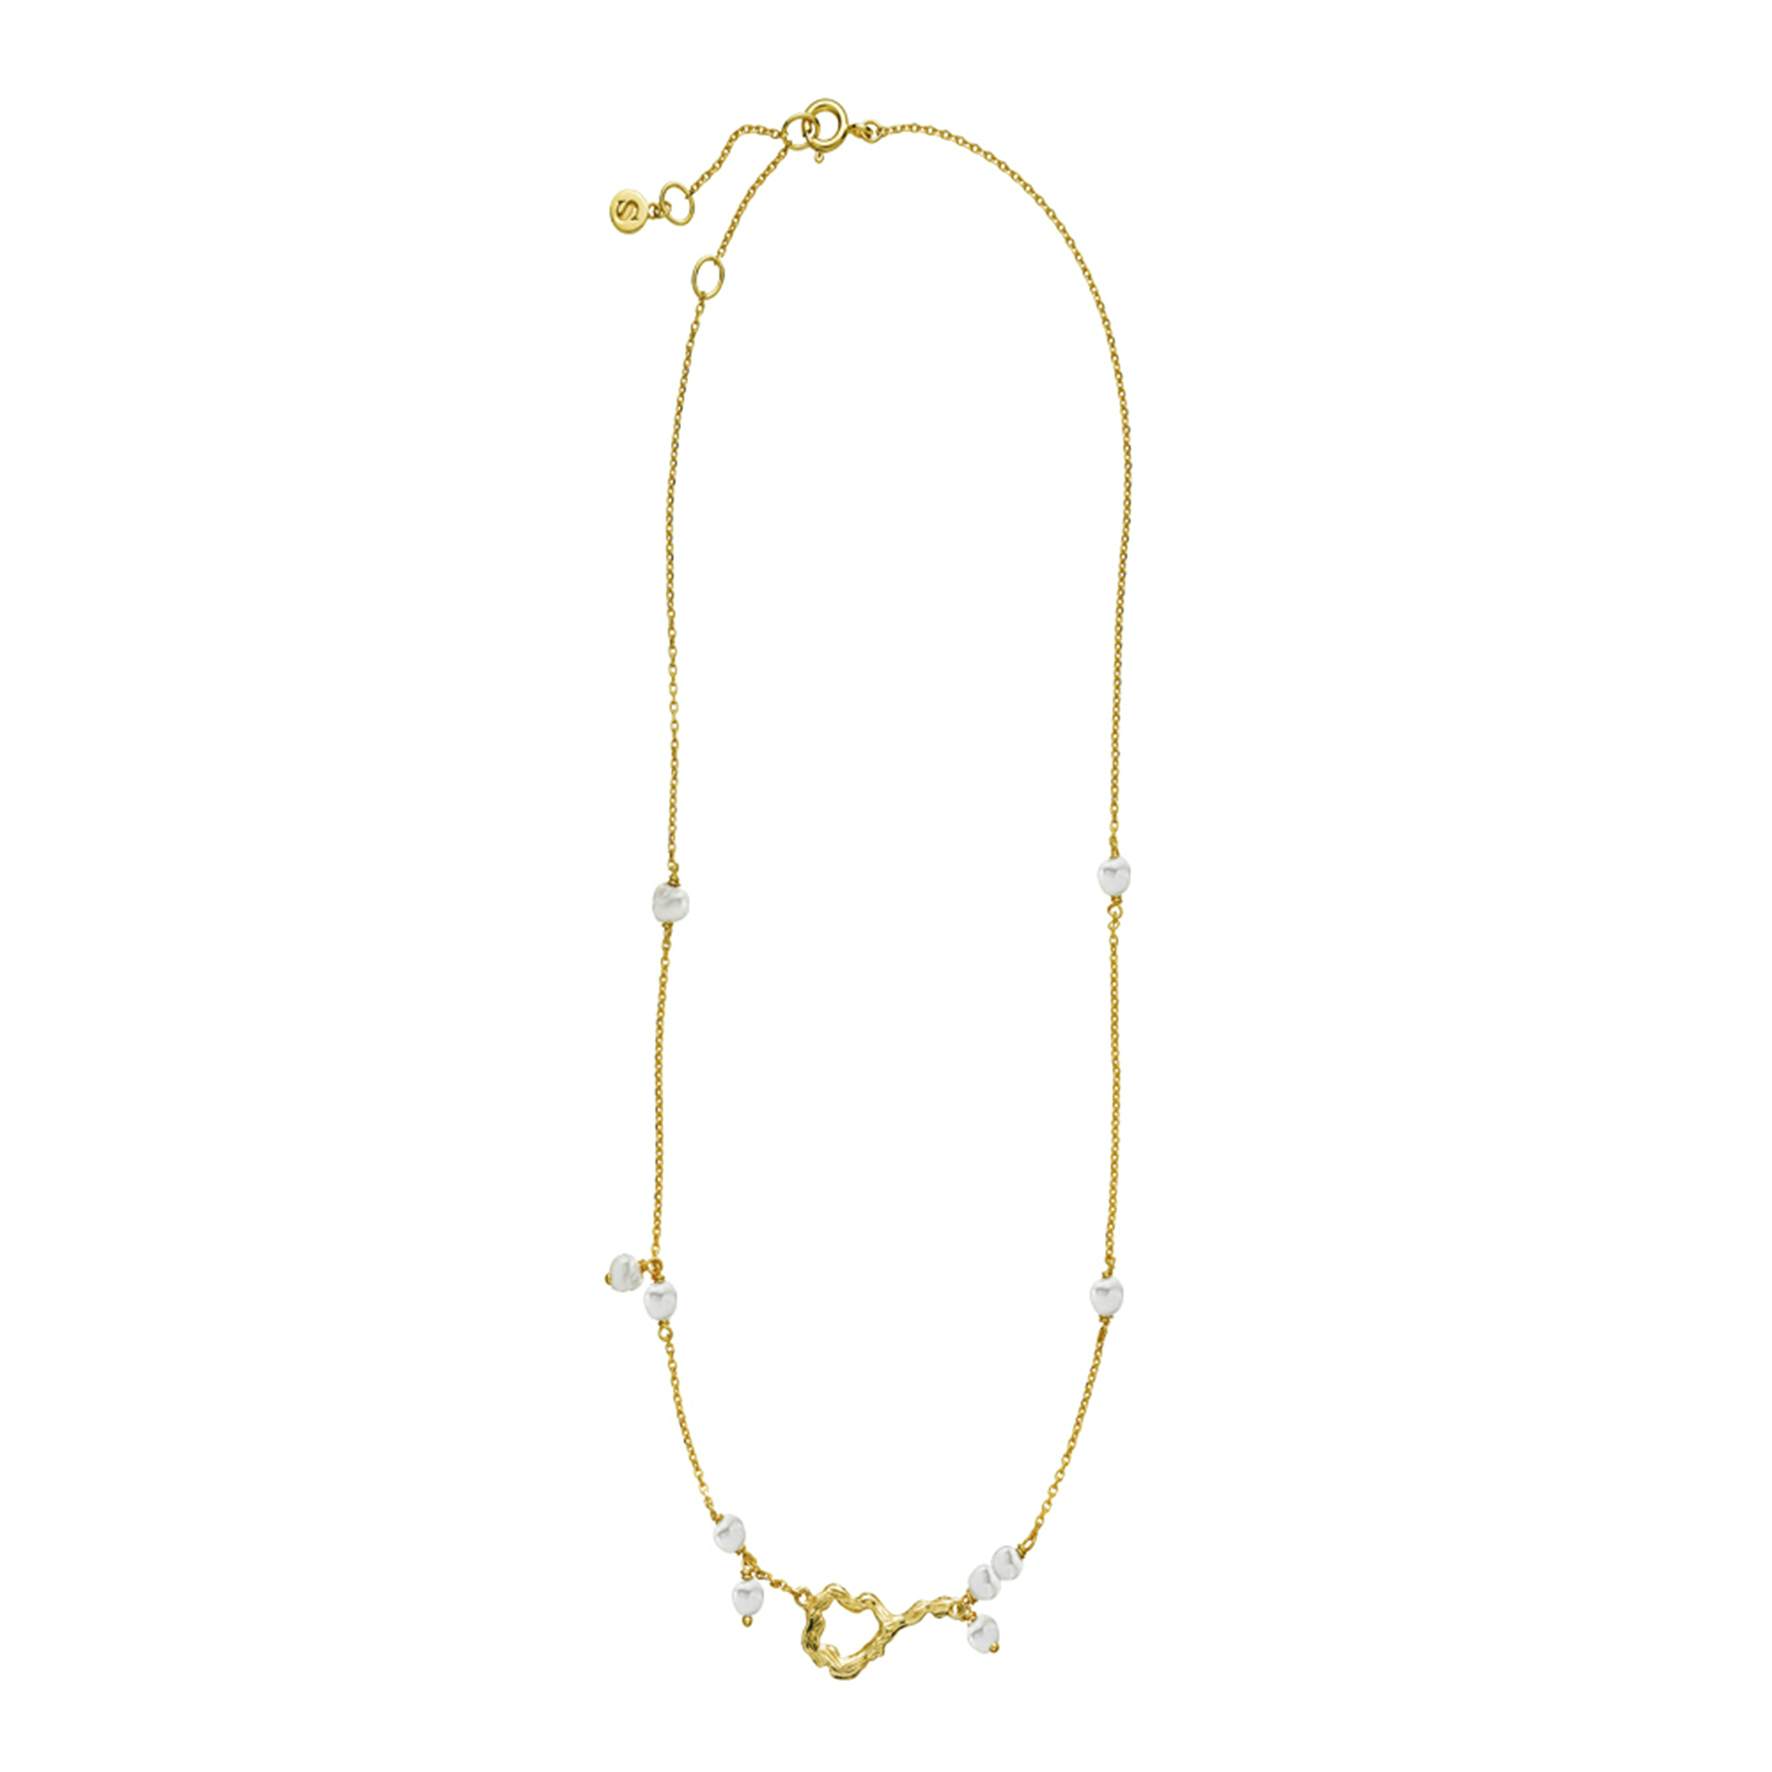 Lærke Bentsen By Sistie Necklace With Pearls from Sistie in Goldplated-Silver Sterling 925|Freshwater Pearl